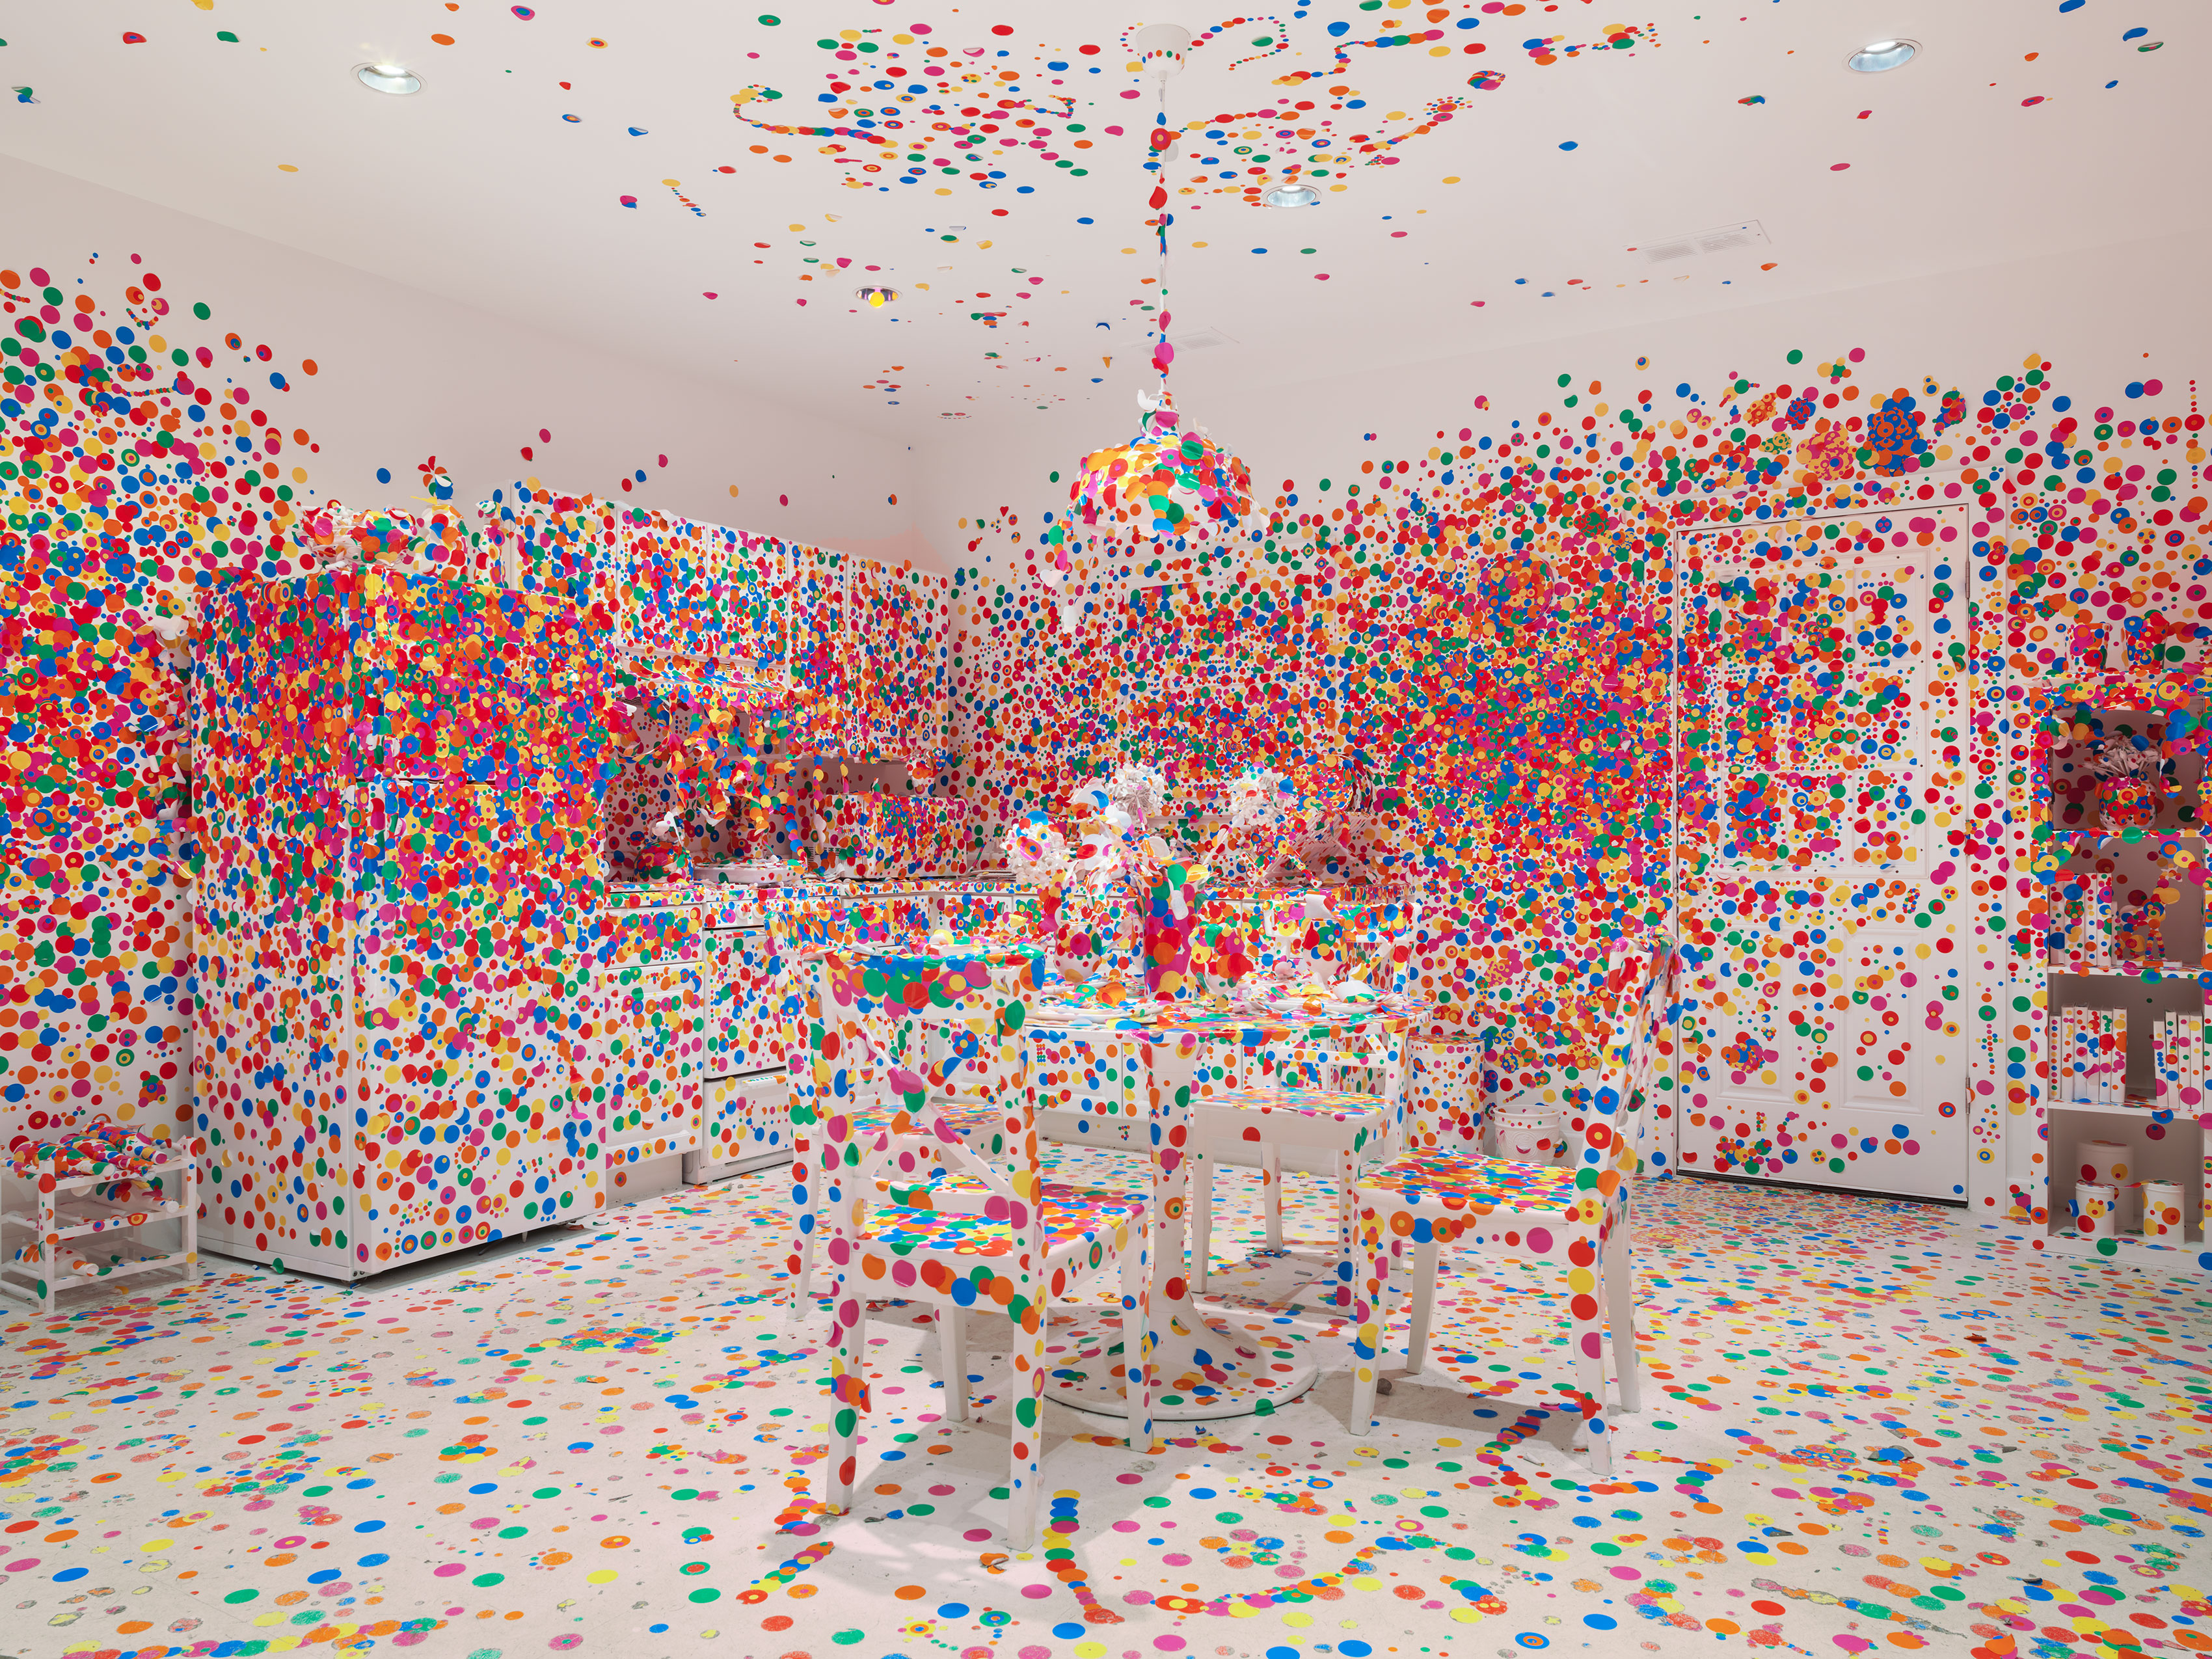 Asia Times reports on Yayoi Kusama: Life is the Heart of a Rainbow